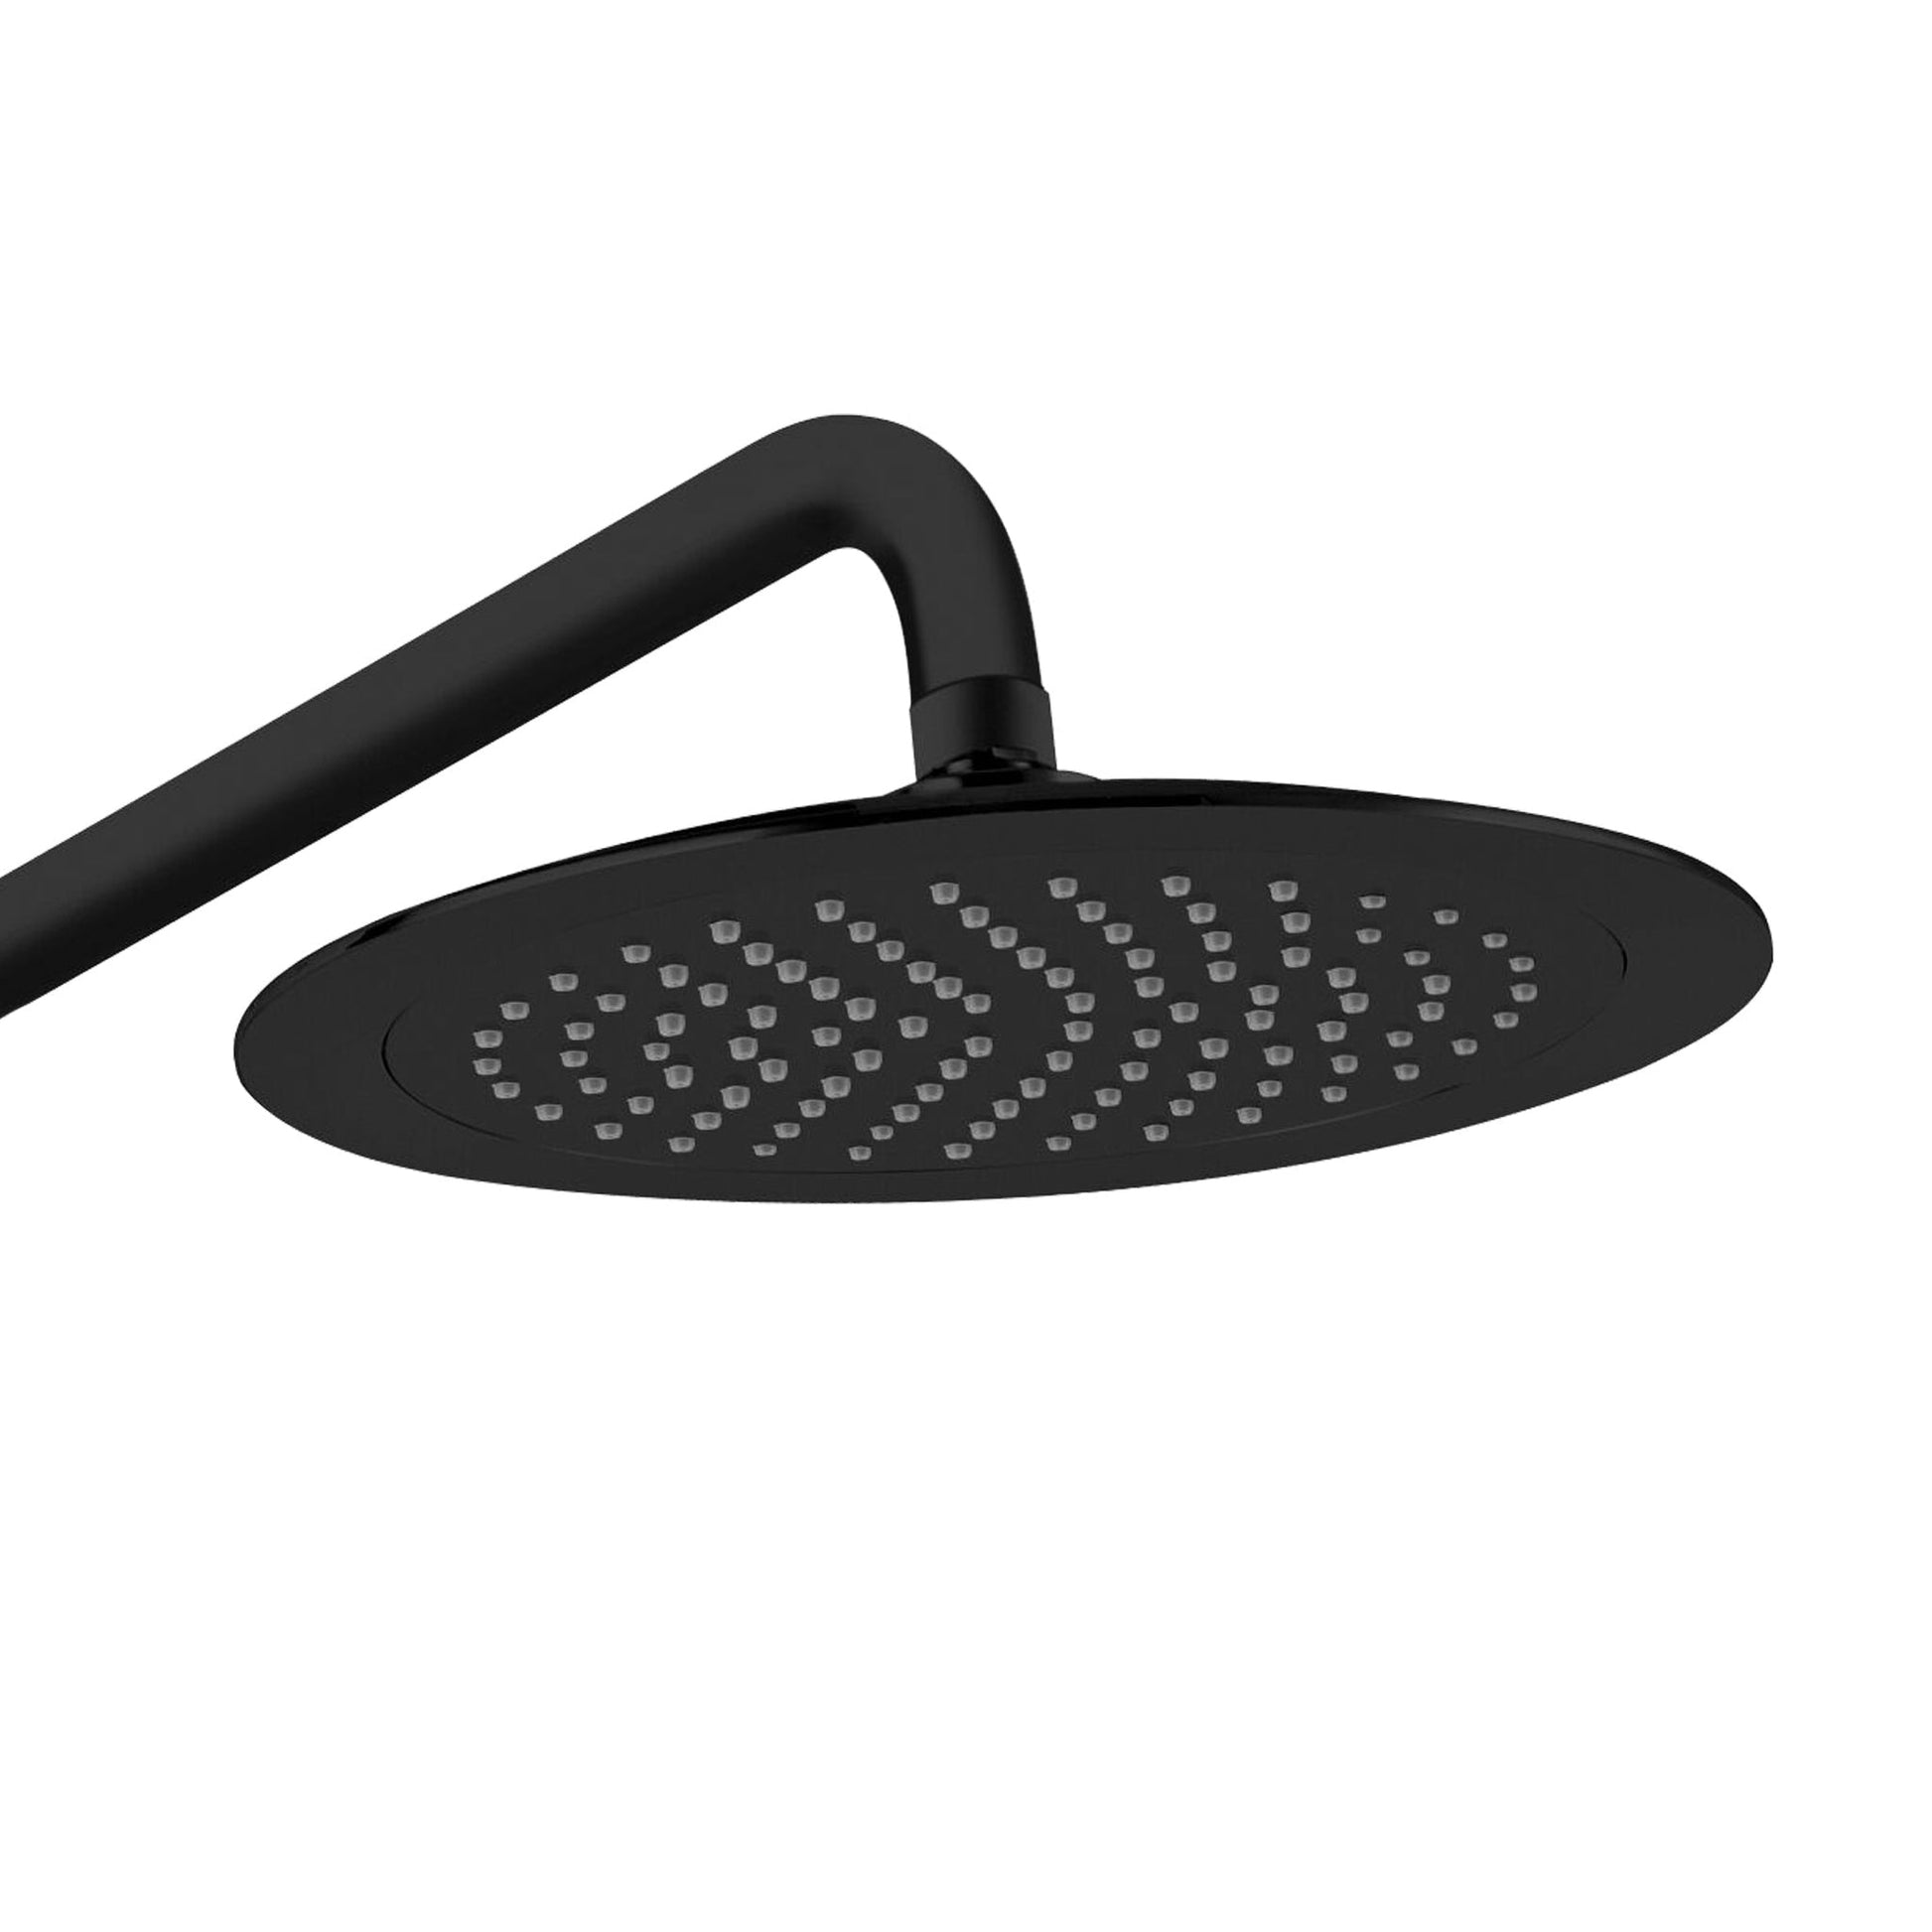 PULSE ShowerSpas Lanai 1.8 GPM Rain Shower System in Matte Black With 3-Power Spray Body Jet and 3-Function Hand Shower